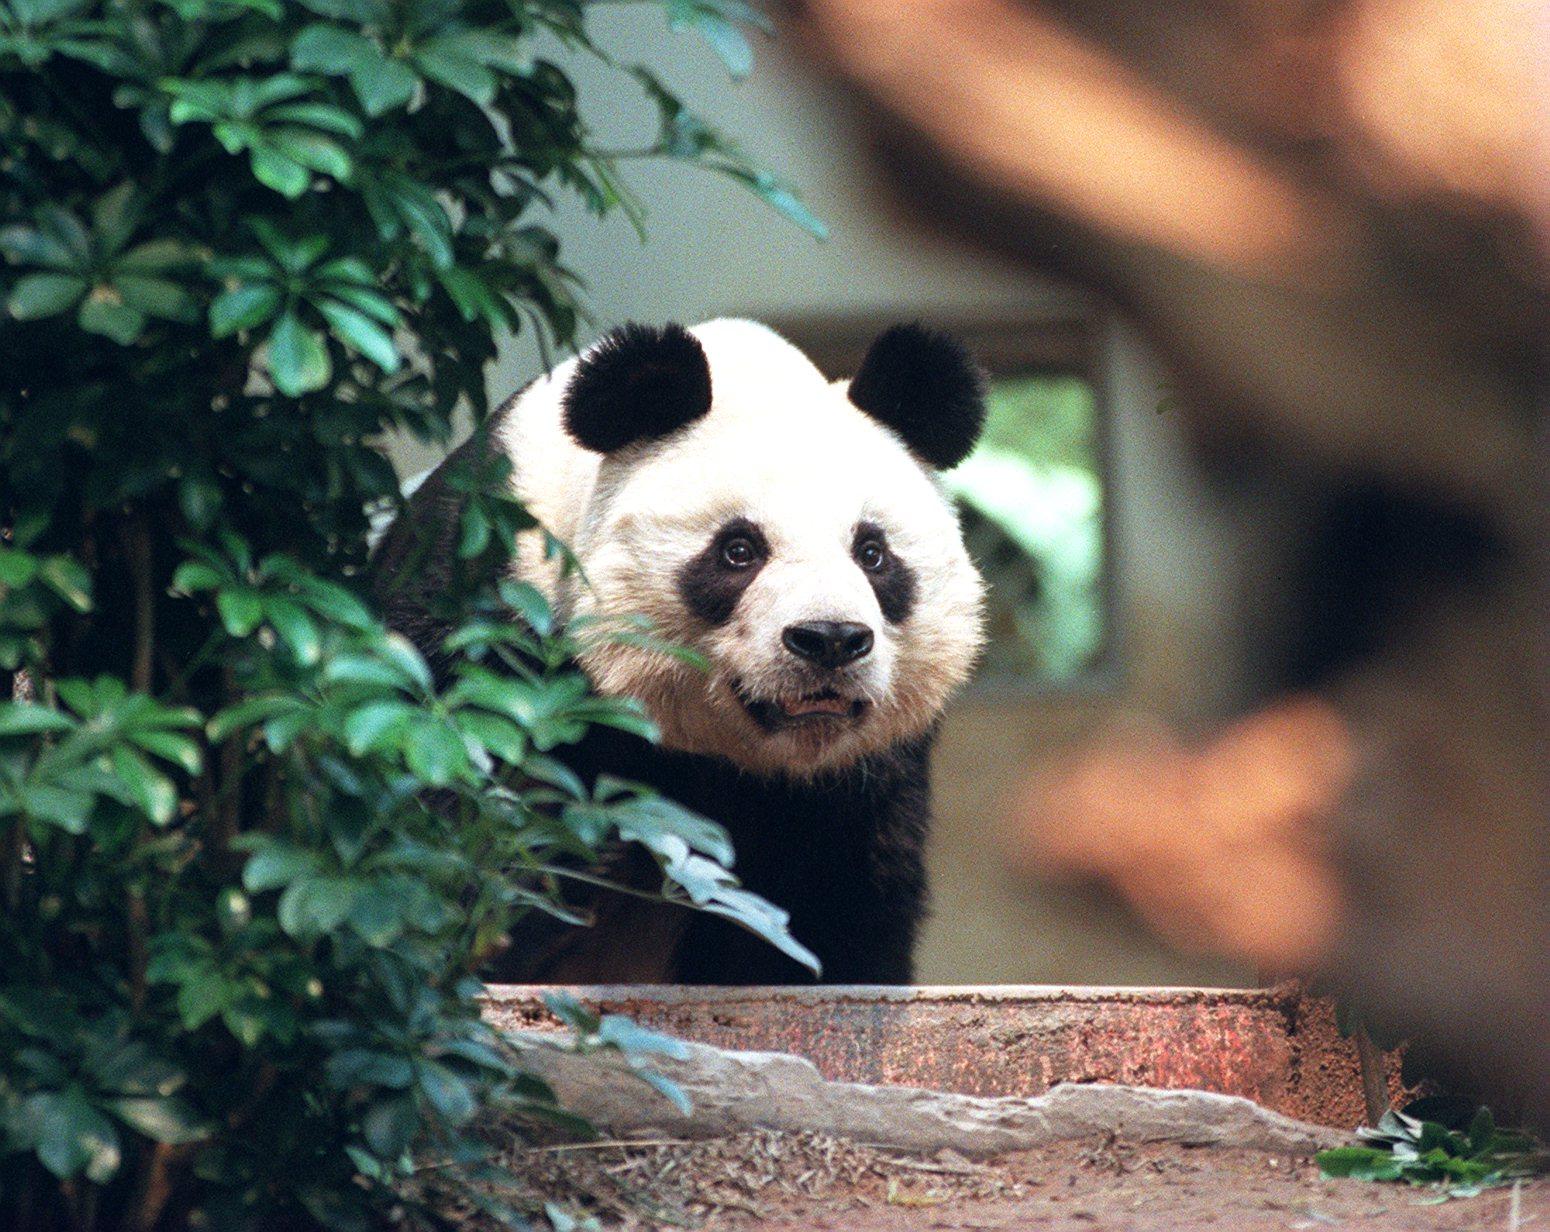 An An in 1999 at Ocean Park, the year the animal arrived in Hong Kong from China. Photo: Martin Chan